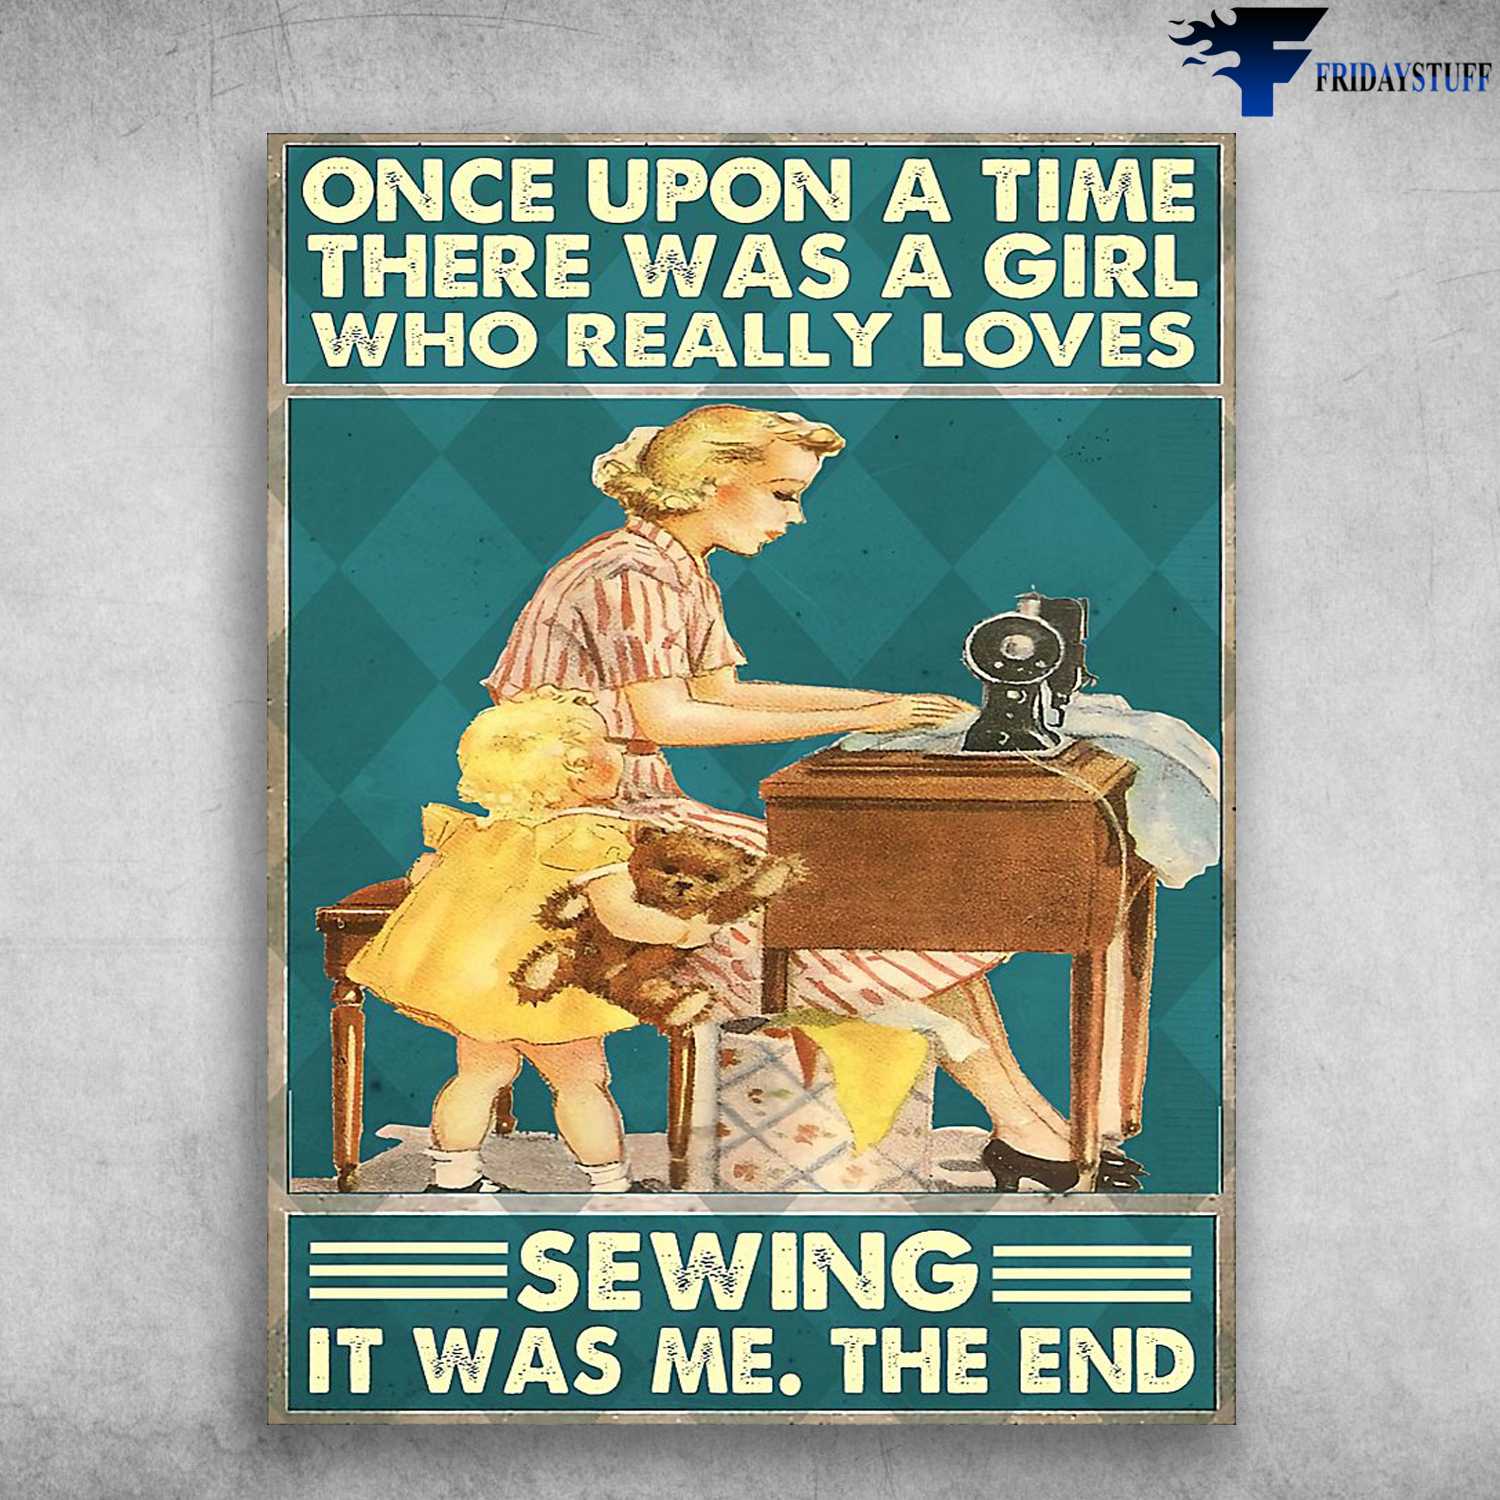 Sewing Mon, Mom And Daughter - Once Upon A Time, There Was A Girl, Who Really Loves Sewing, It Was Me, The End